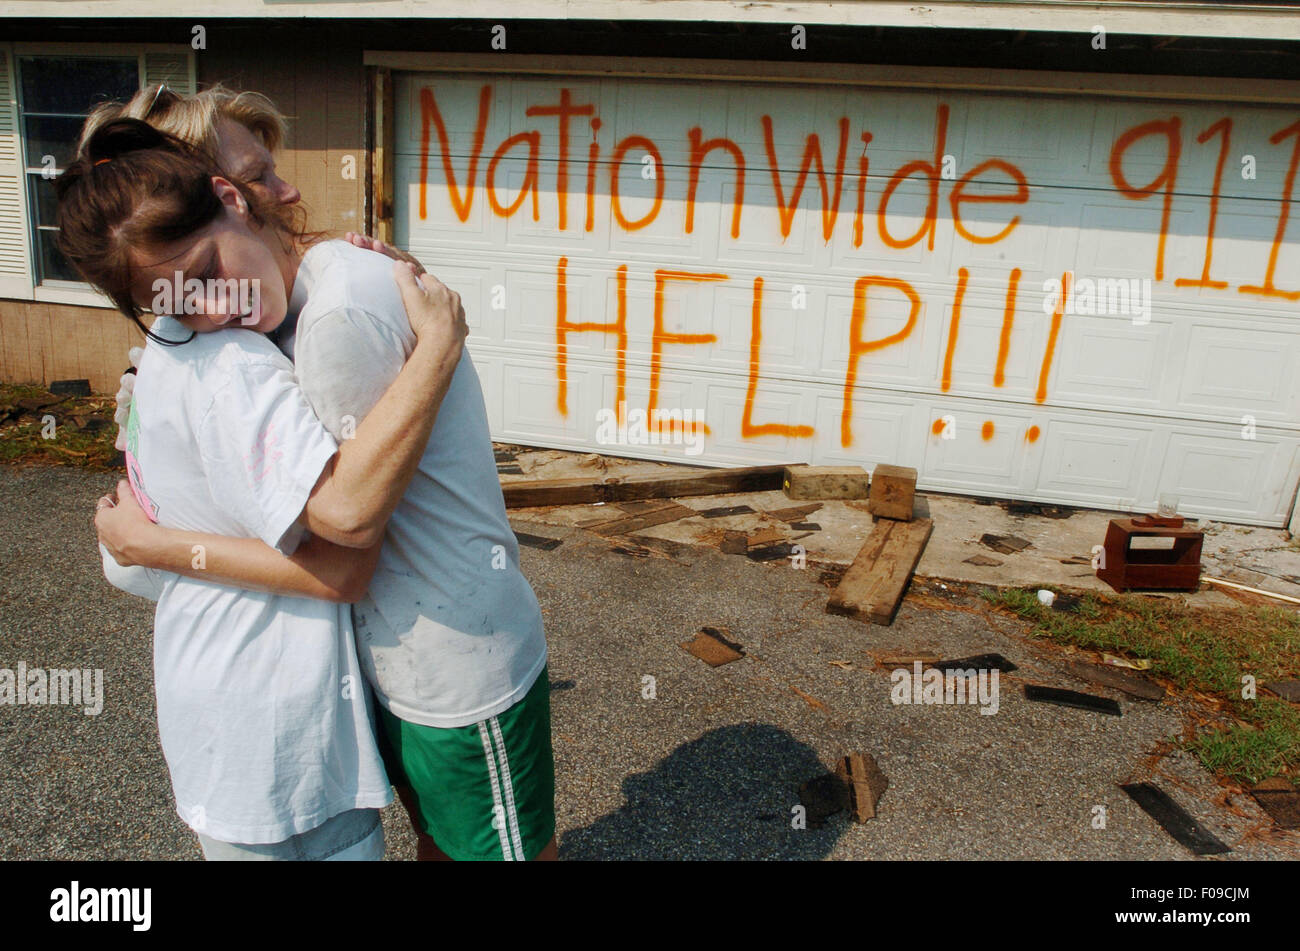 Sep 05, 2005; Pass Christian, MS, USA; New York Papers OUT! Linda Ladner hugs her daughter Michele Ladner, 20, who spray painted a message on her garage door as they return to collect salvageable personal effects in the aftermath of Hurricane Katrina in Pass Christian. Mandatory Credit: Photo by Bryan Smith/ZUMA Press. (©) Copyright 2005 by Bryan Smith Stock Photo